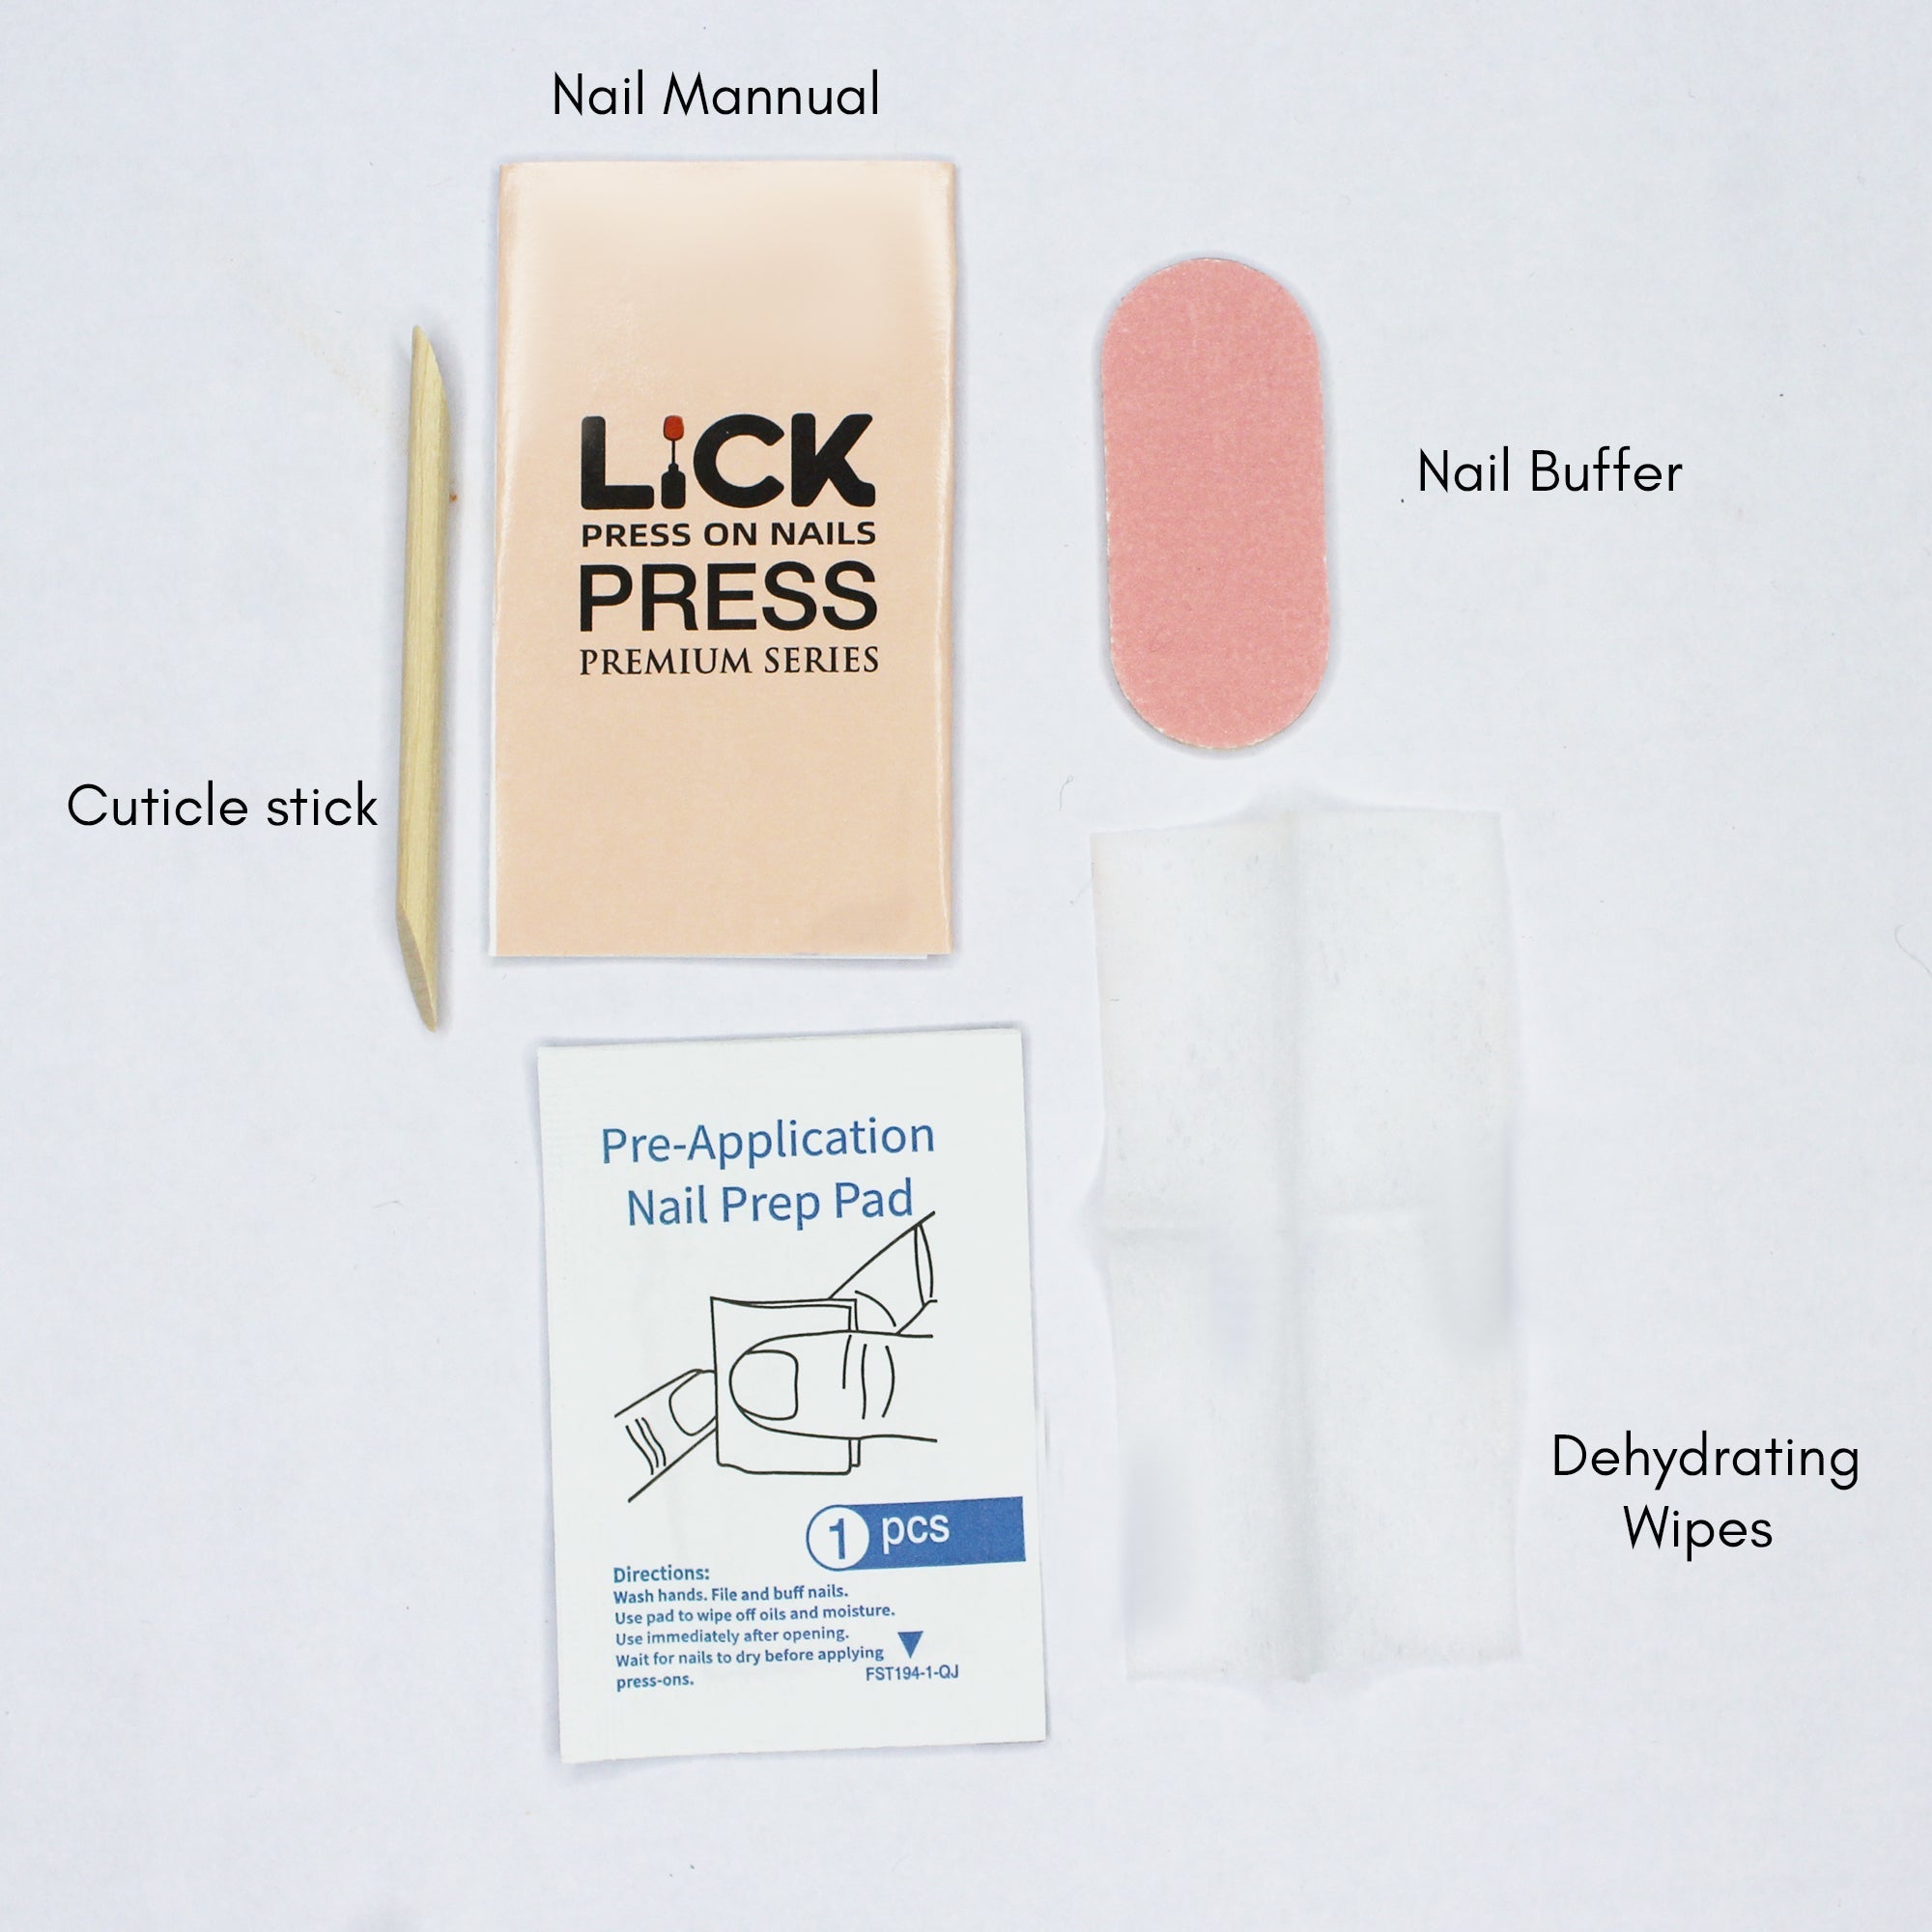 Lick Nail Glossy Finish Nude With French Tips Oval Shape Press On Nails Pack Of 24 Pcs